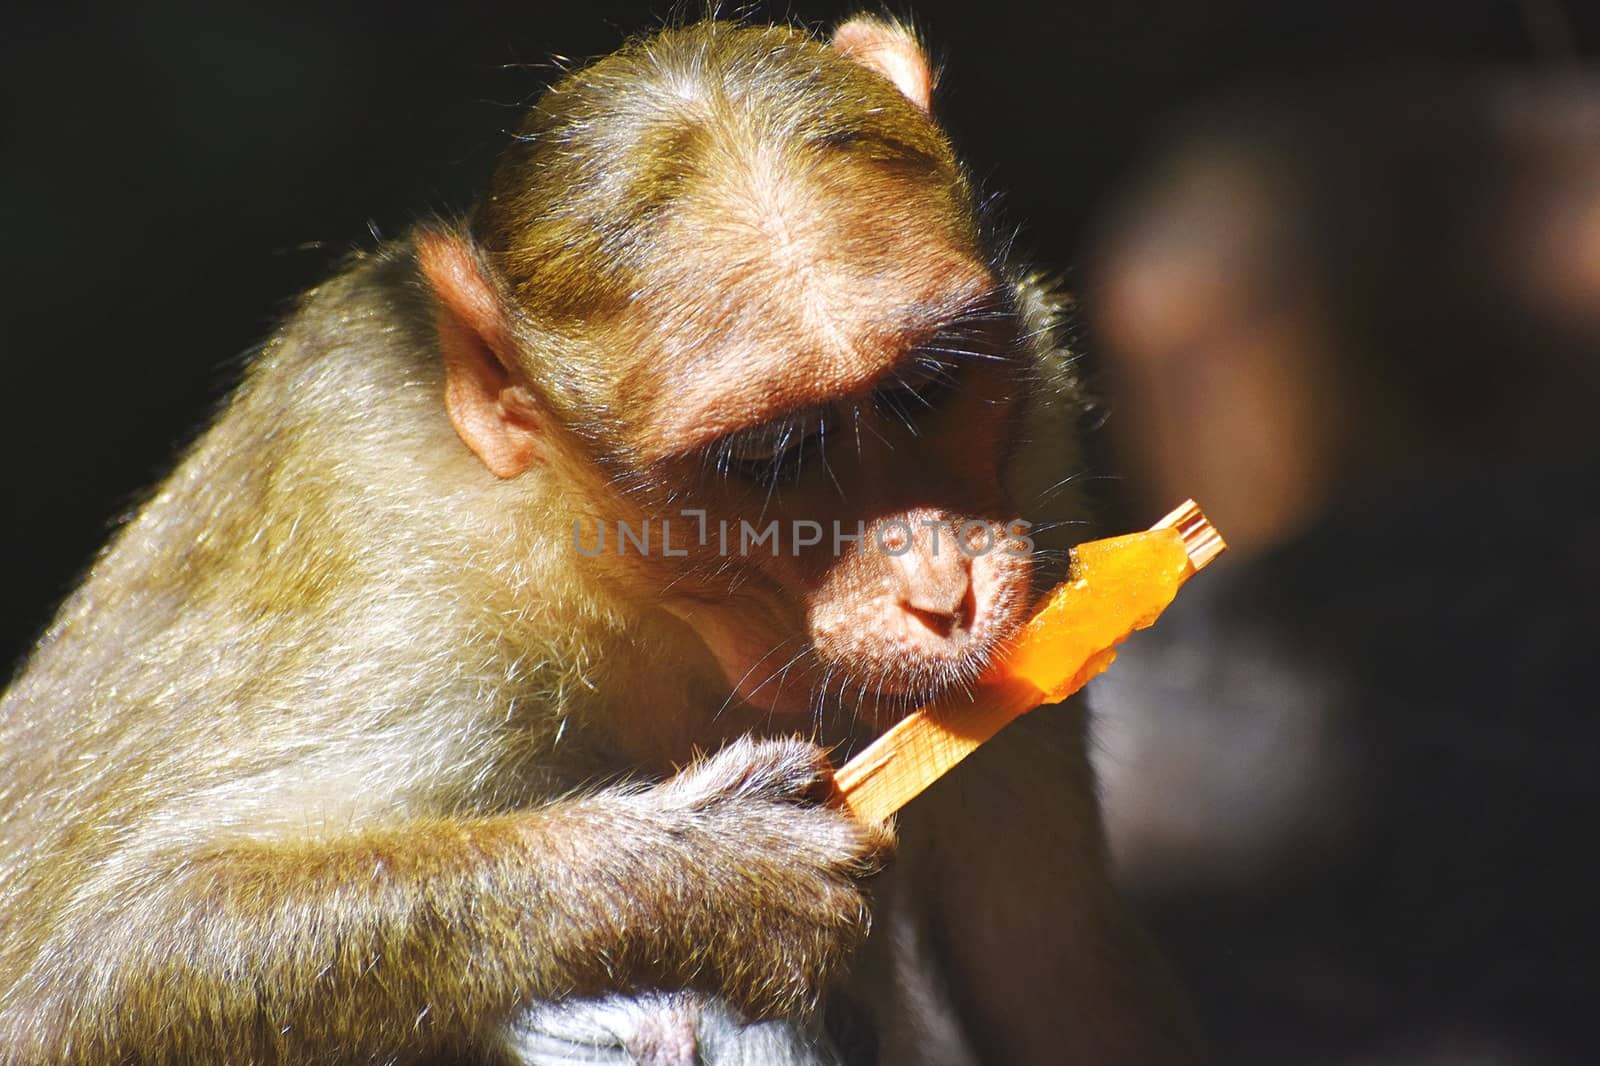 A Monkey is eating something